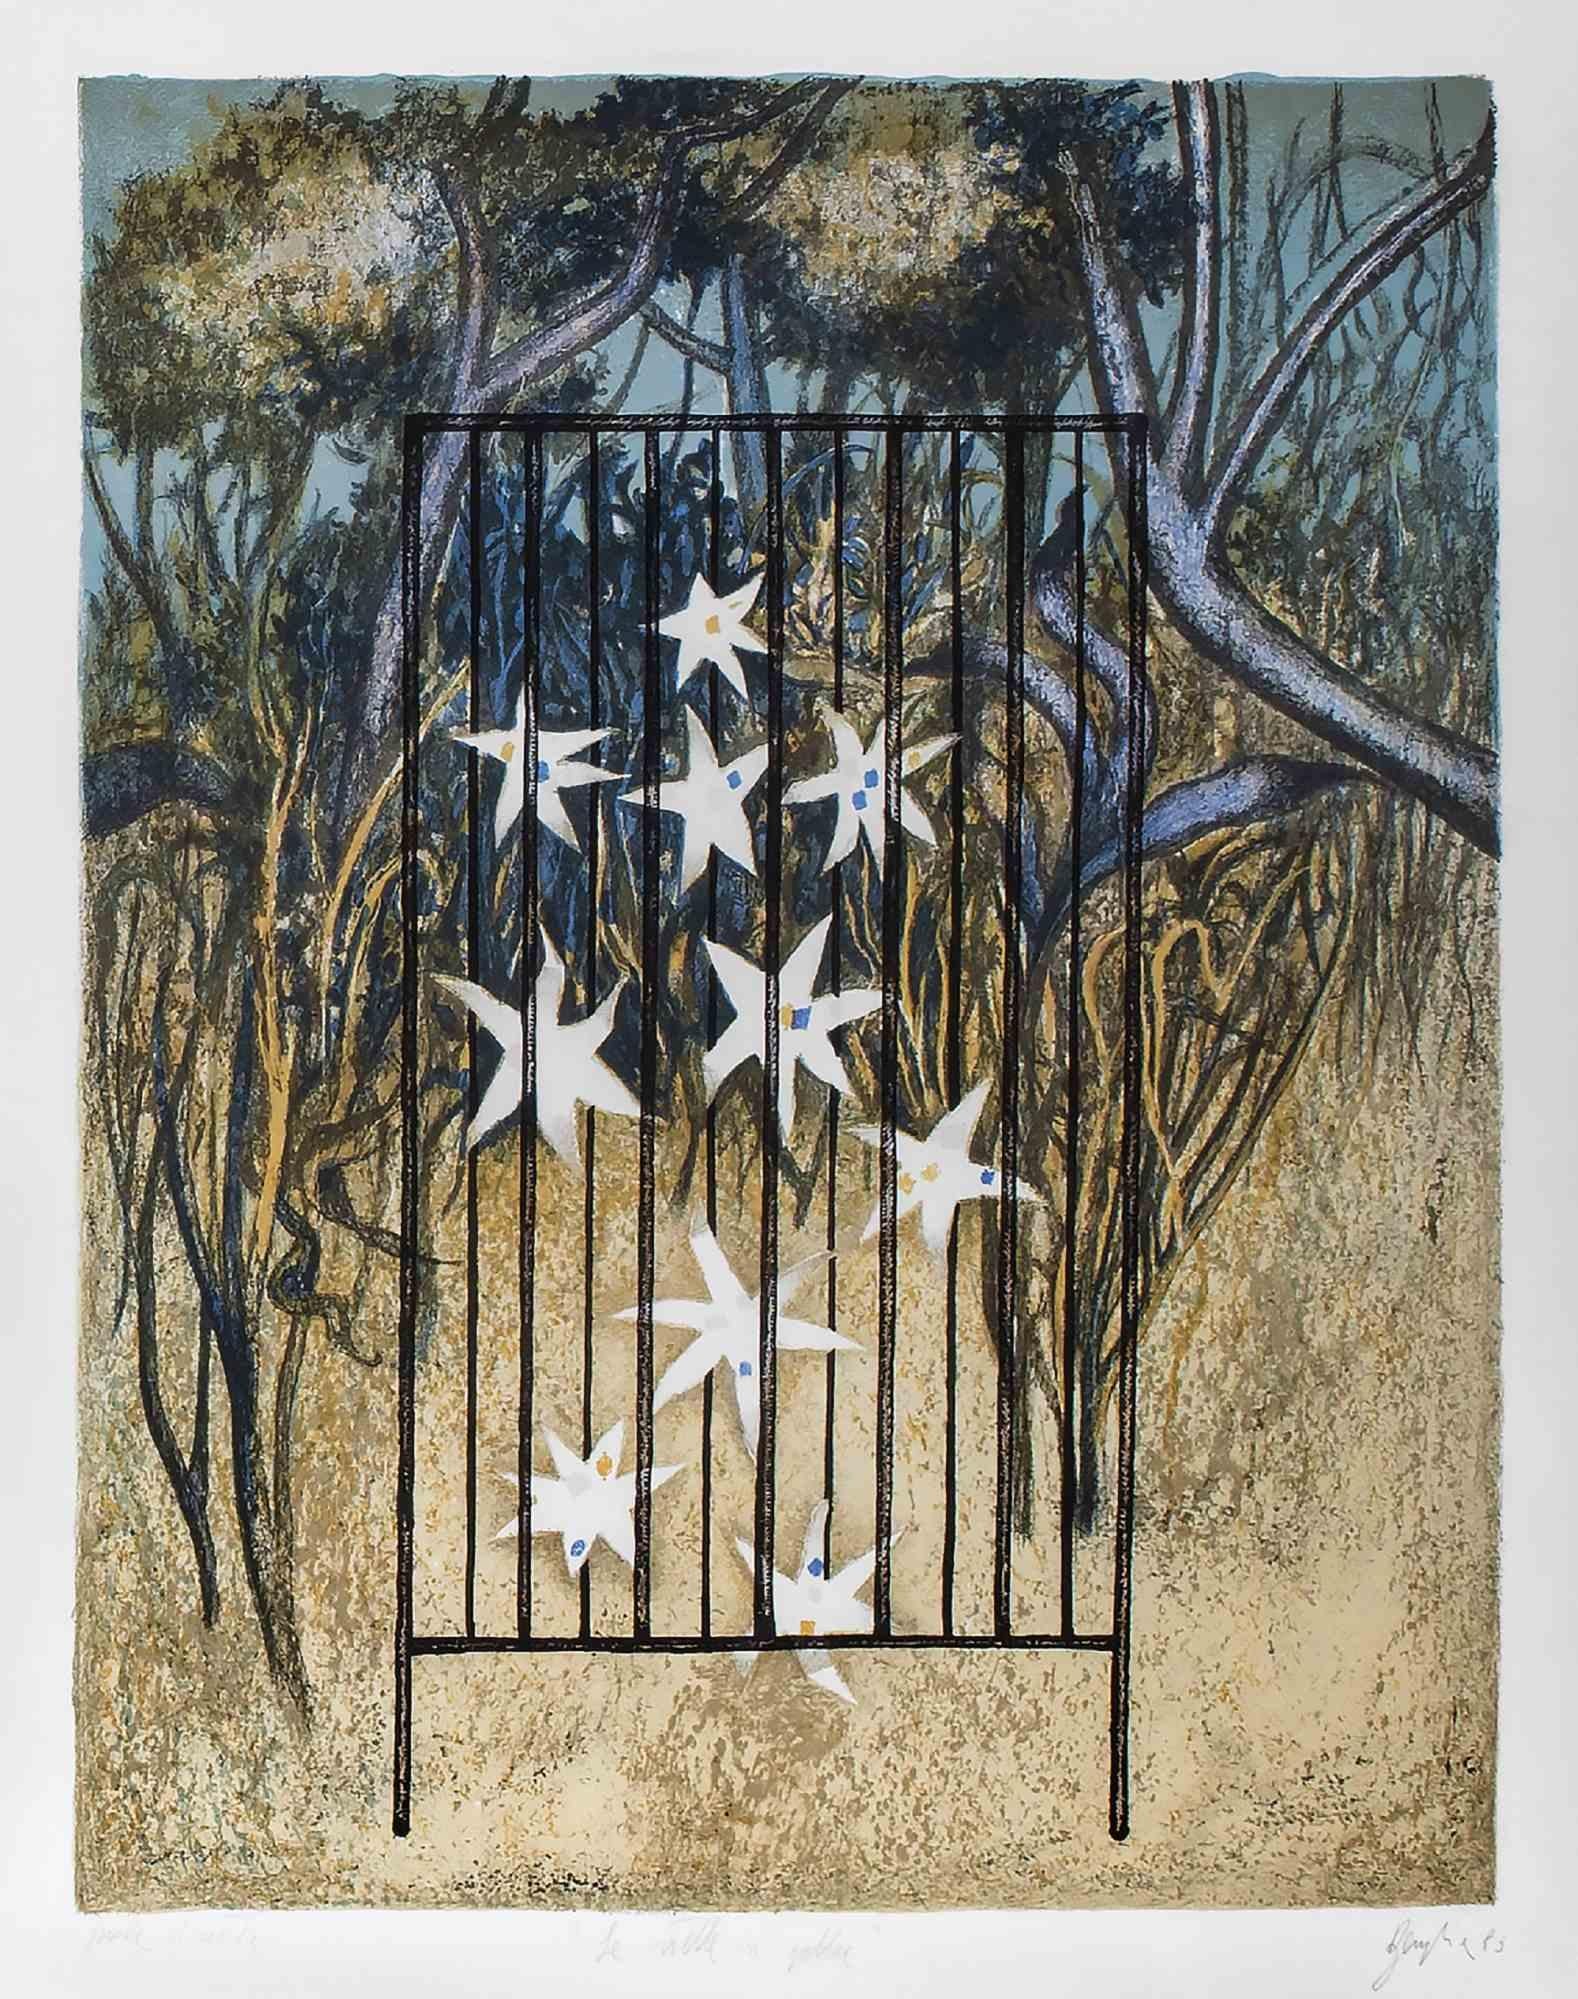 ENRICO BENAGLIA
Flowers in the cage, 1983
Litography, ex. P.d.A., 57 x 47 cm
Signed and dated lower right: Benaglia 83
Good conditions. Framed.